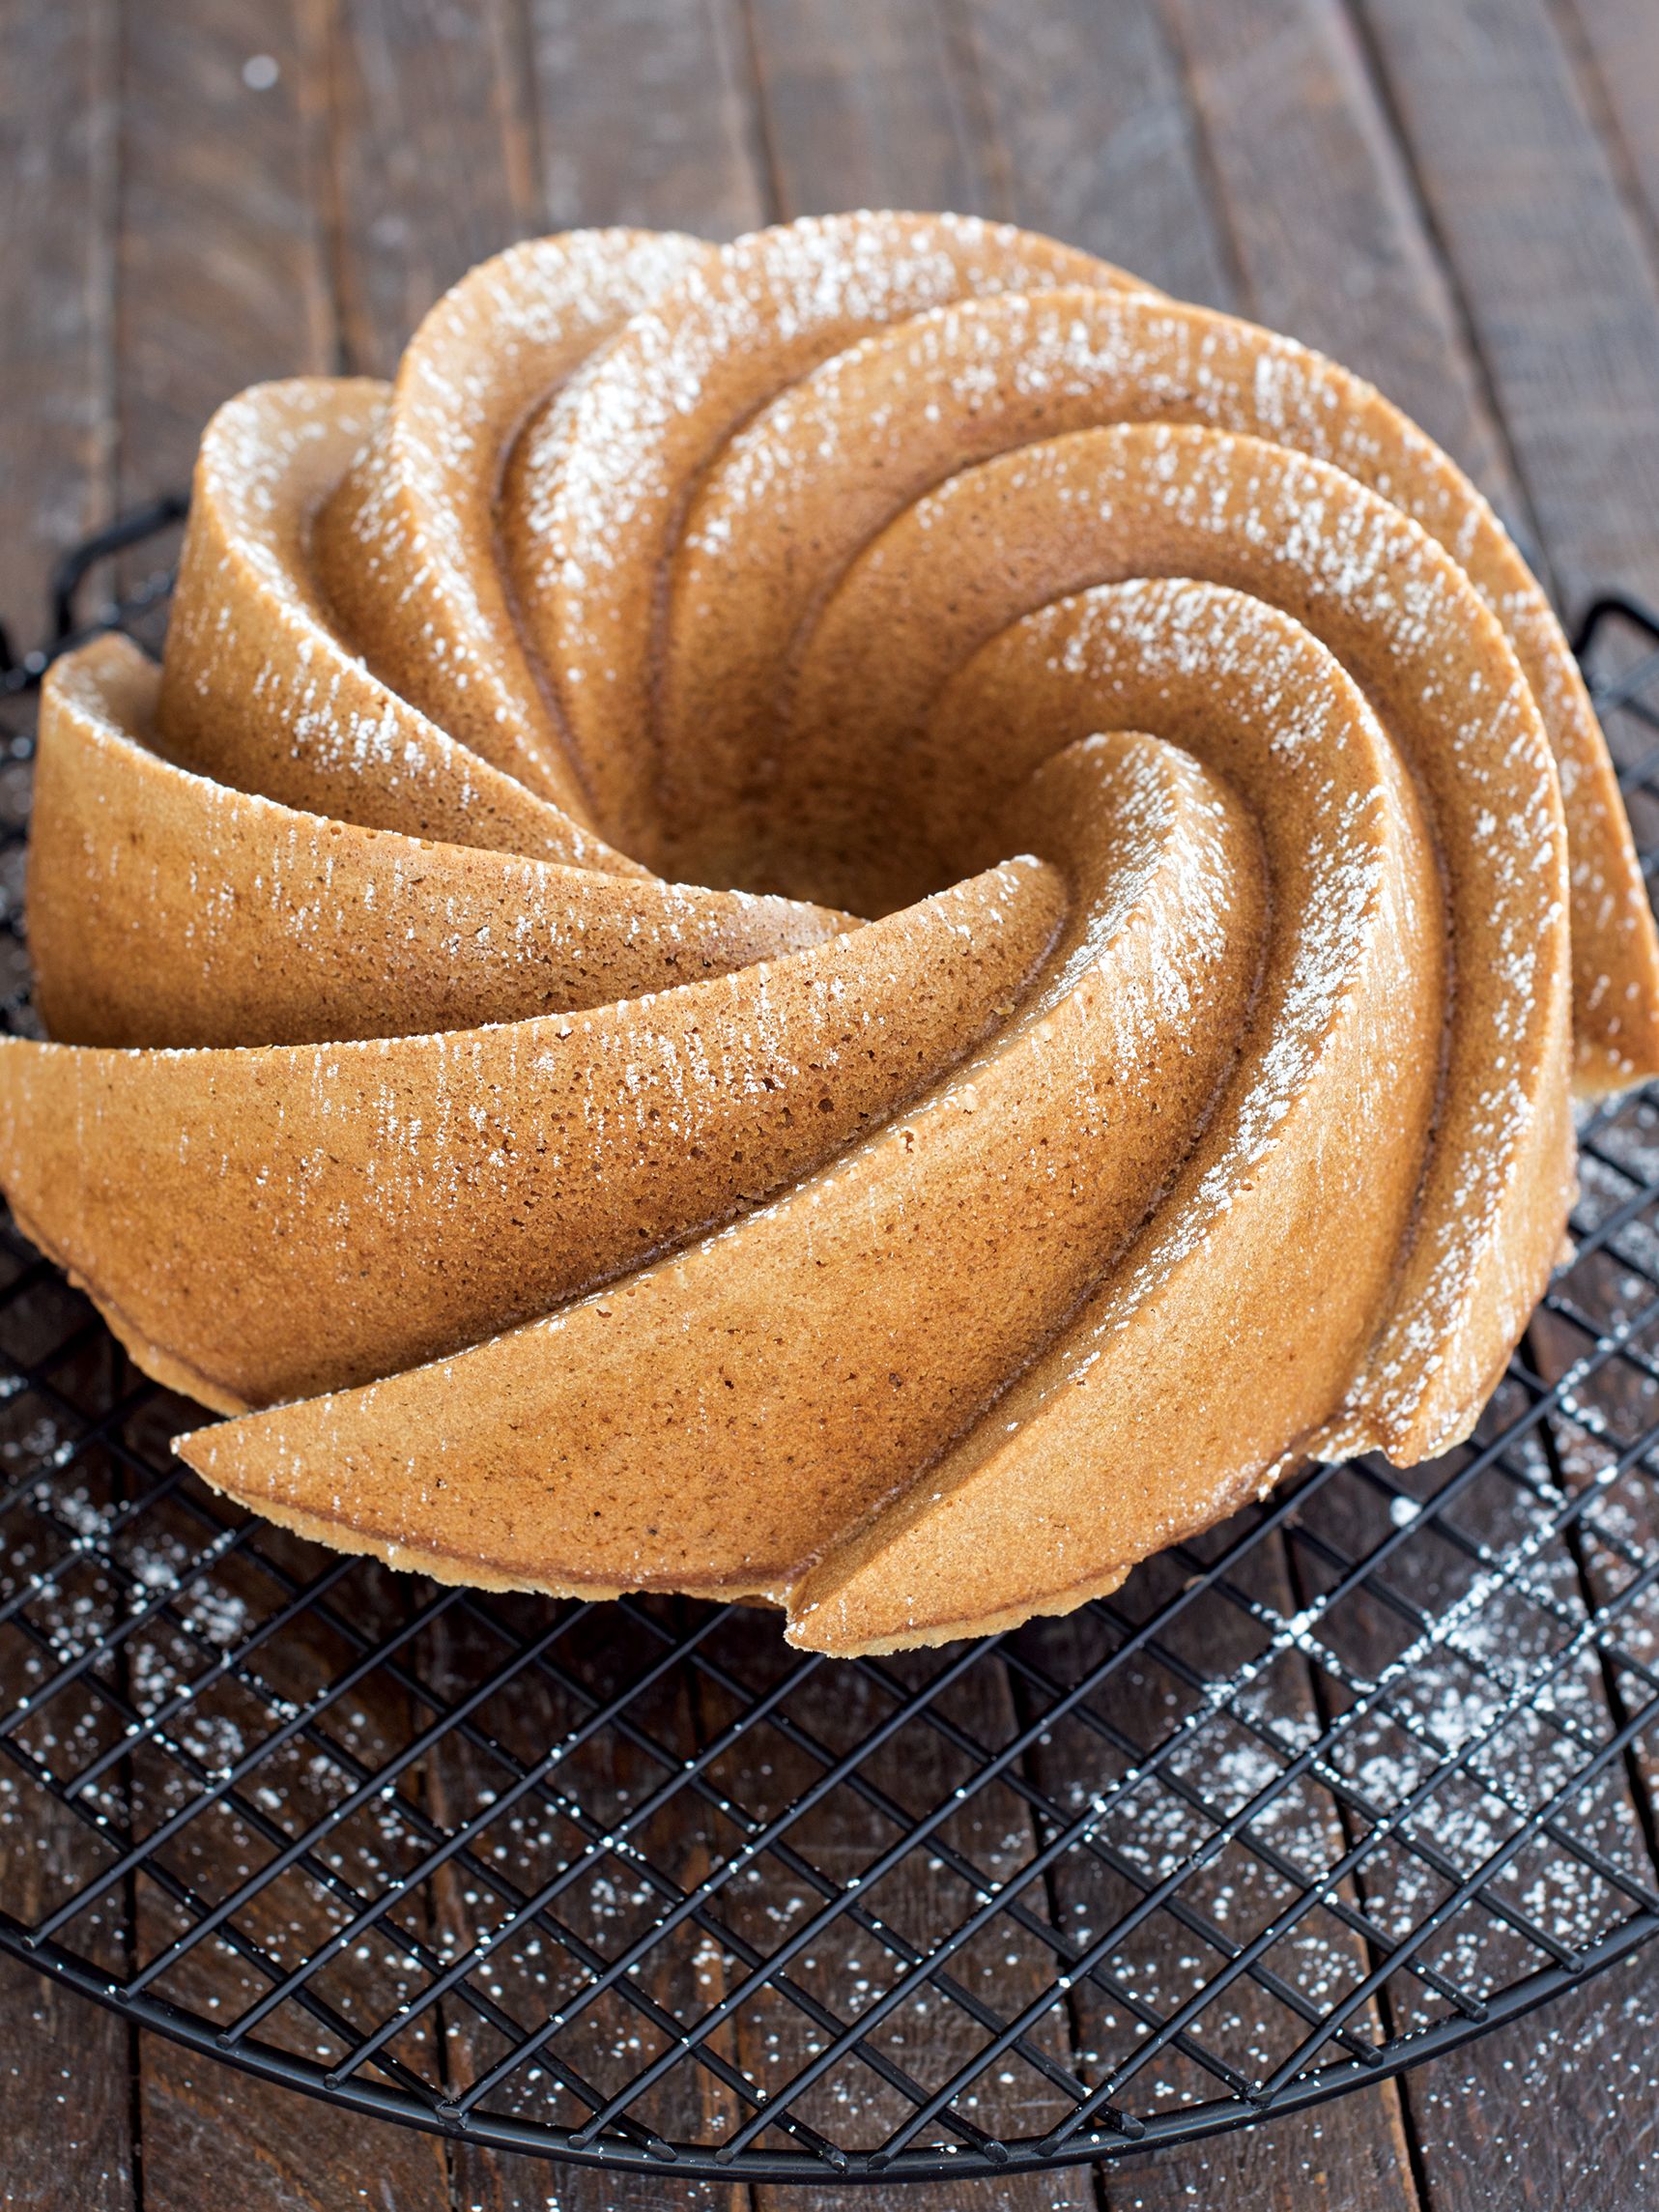 Nordic Ware Heritage Bundt Pan 10 Cup | The Cake Boutique